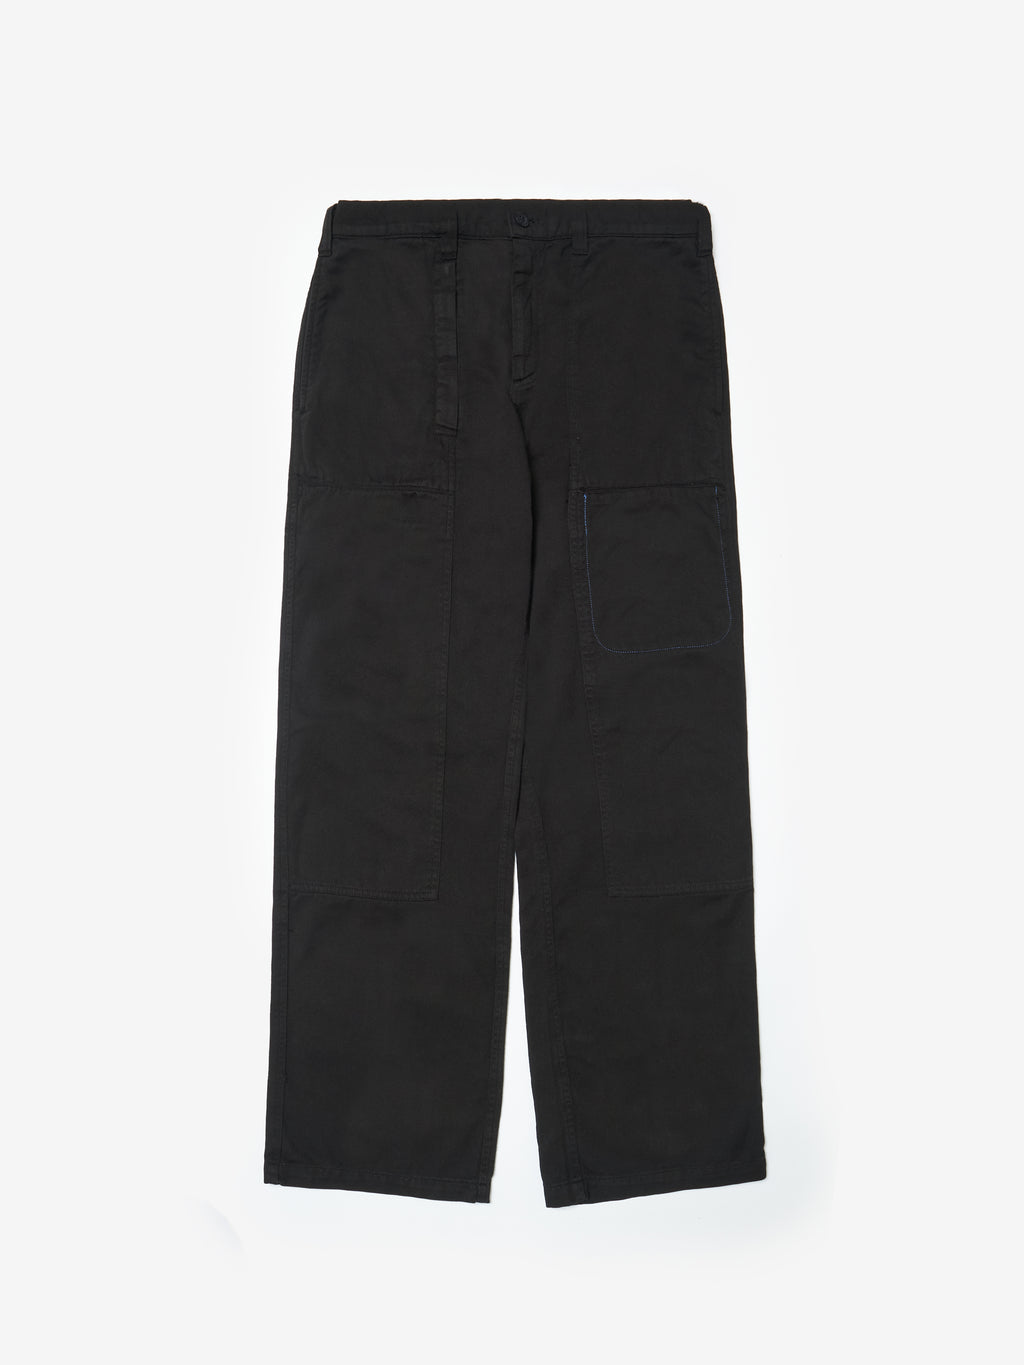 Double Knee Trousers - Black